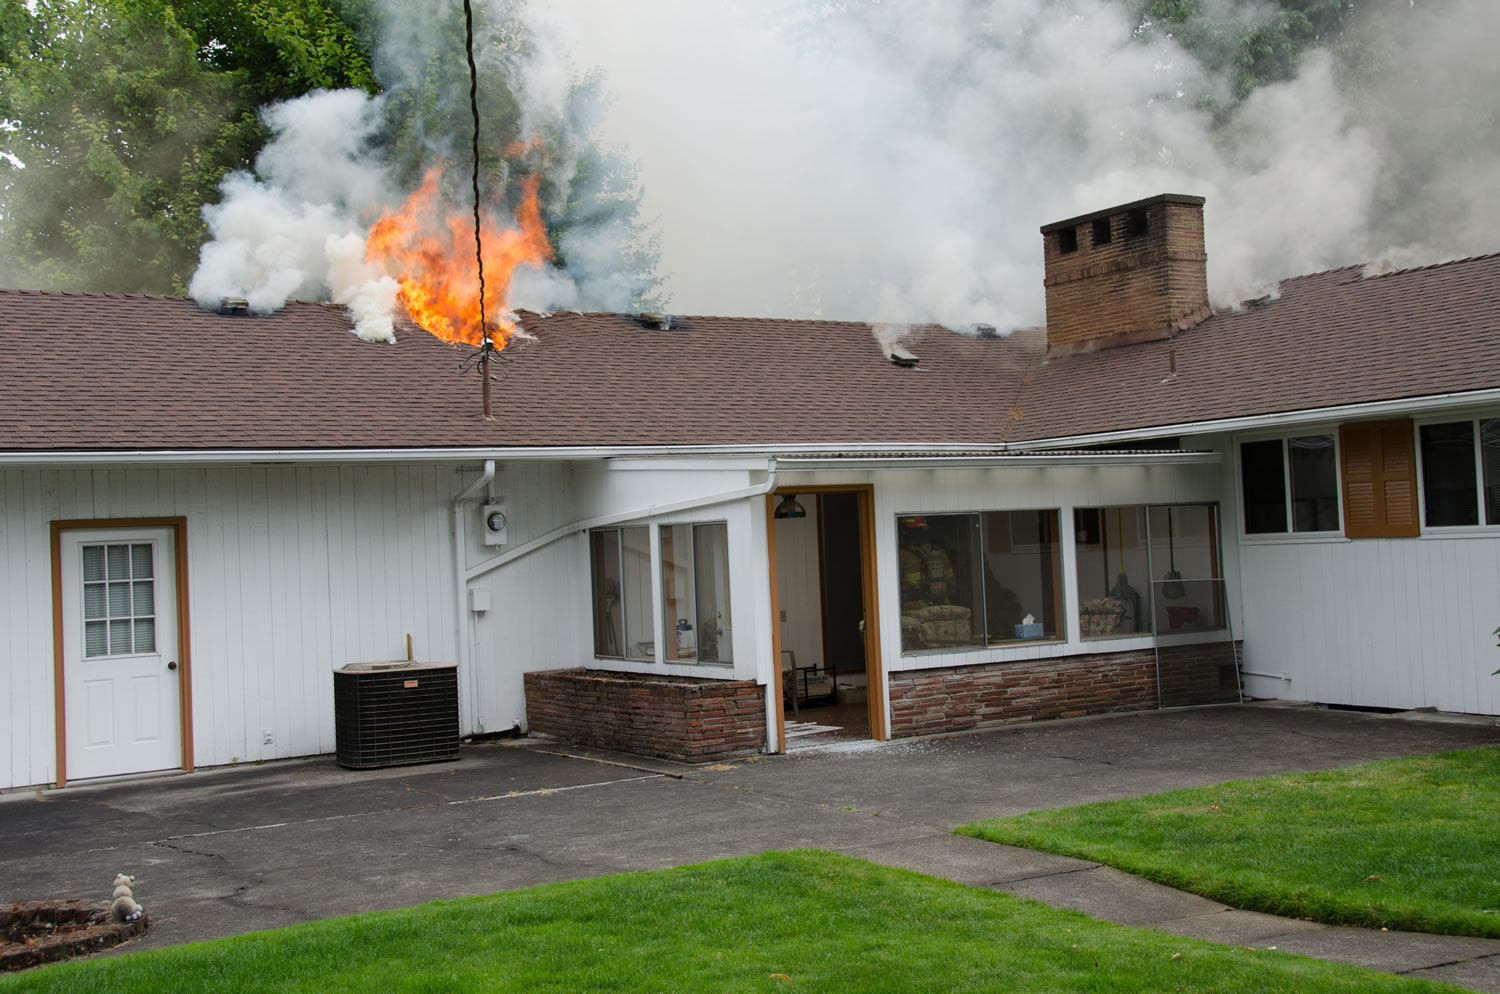 An attic fire damaged this West Hazel Dell home on Tuesday afternoon.